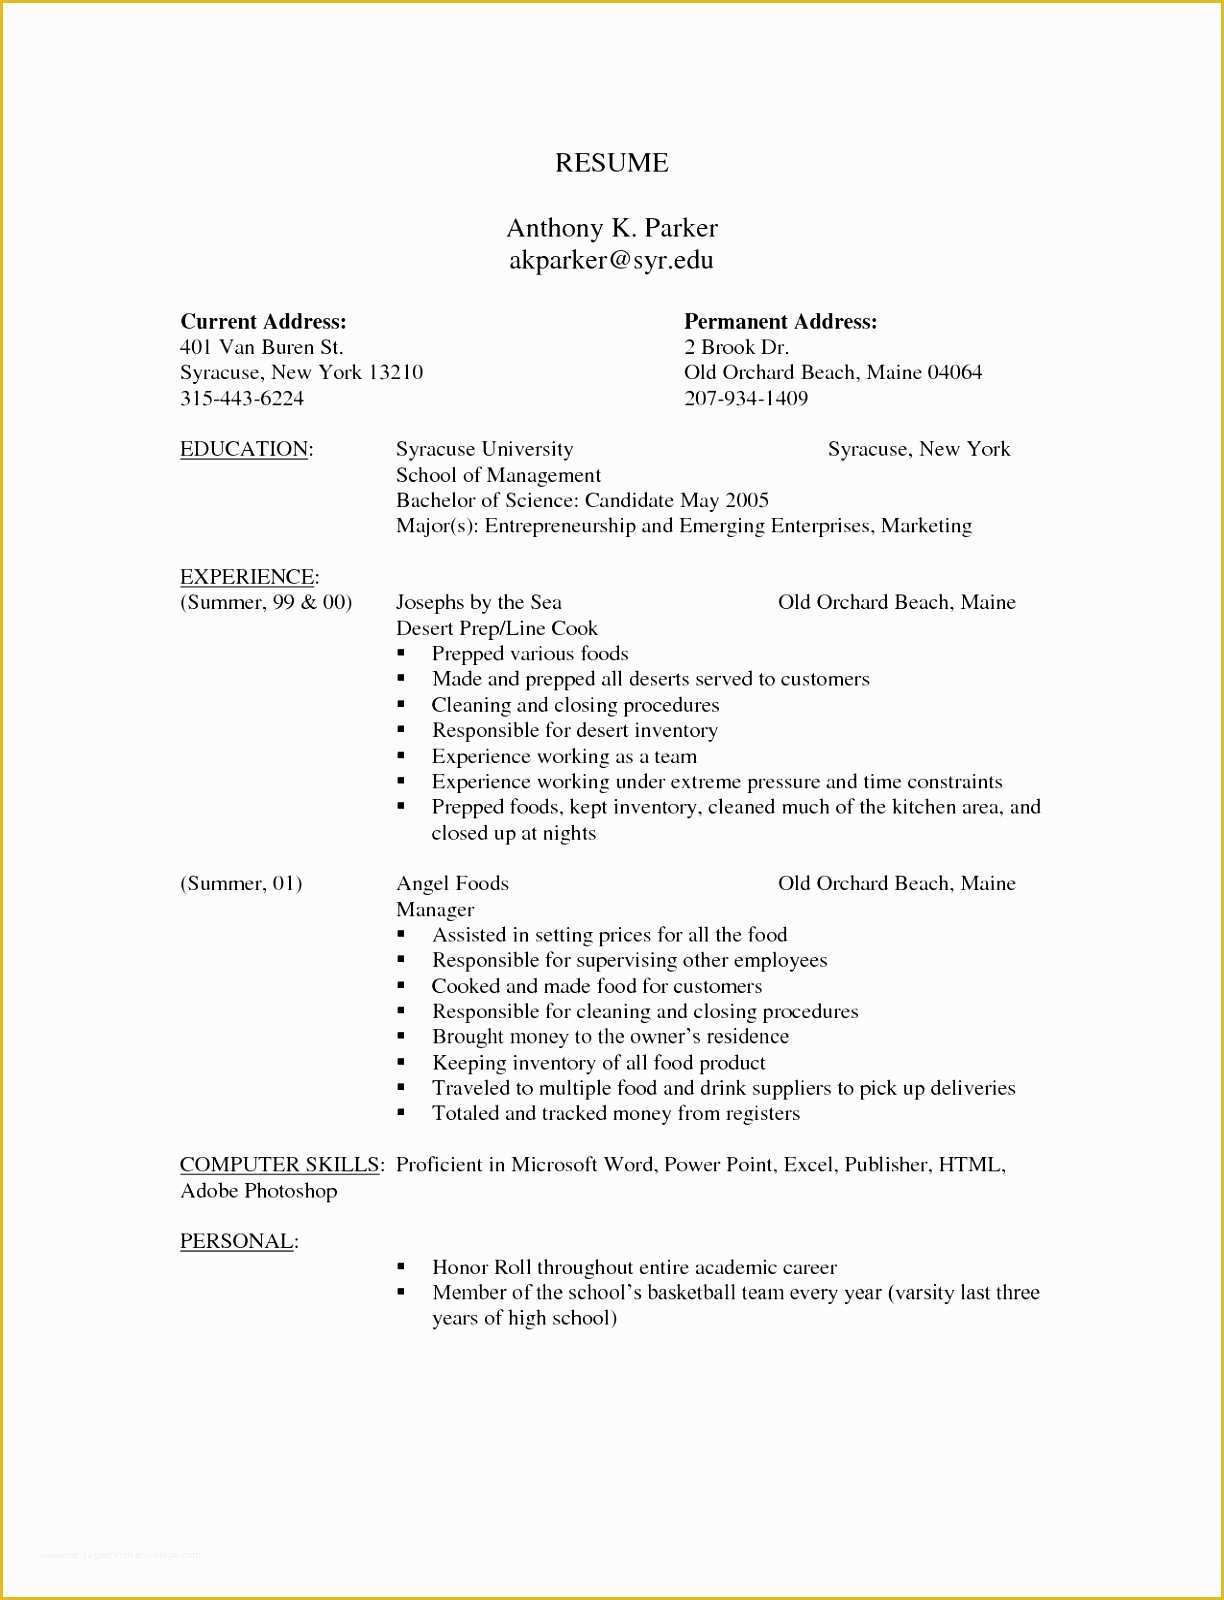 Free Resume Templates to Fill In and Print Of 10 Free Printable Fill In the Blank Resume Templates Laioa